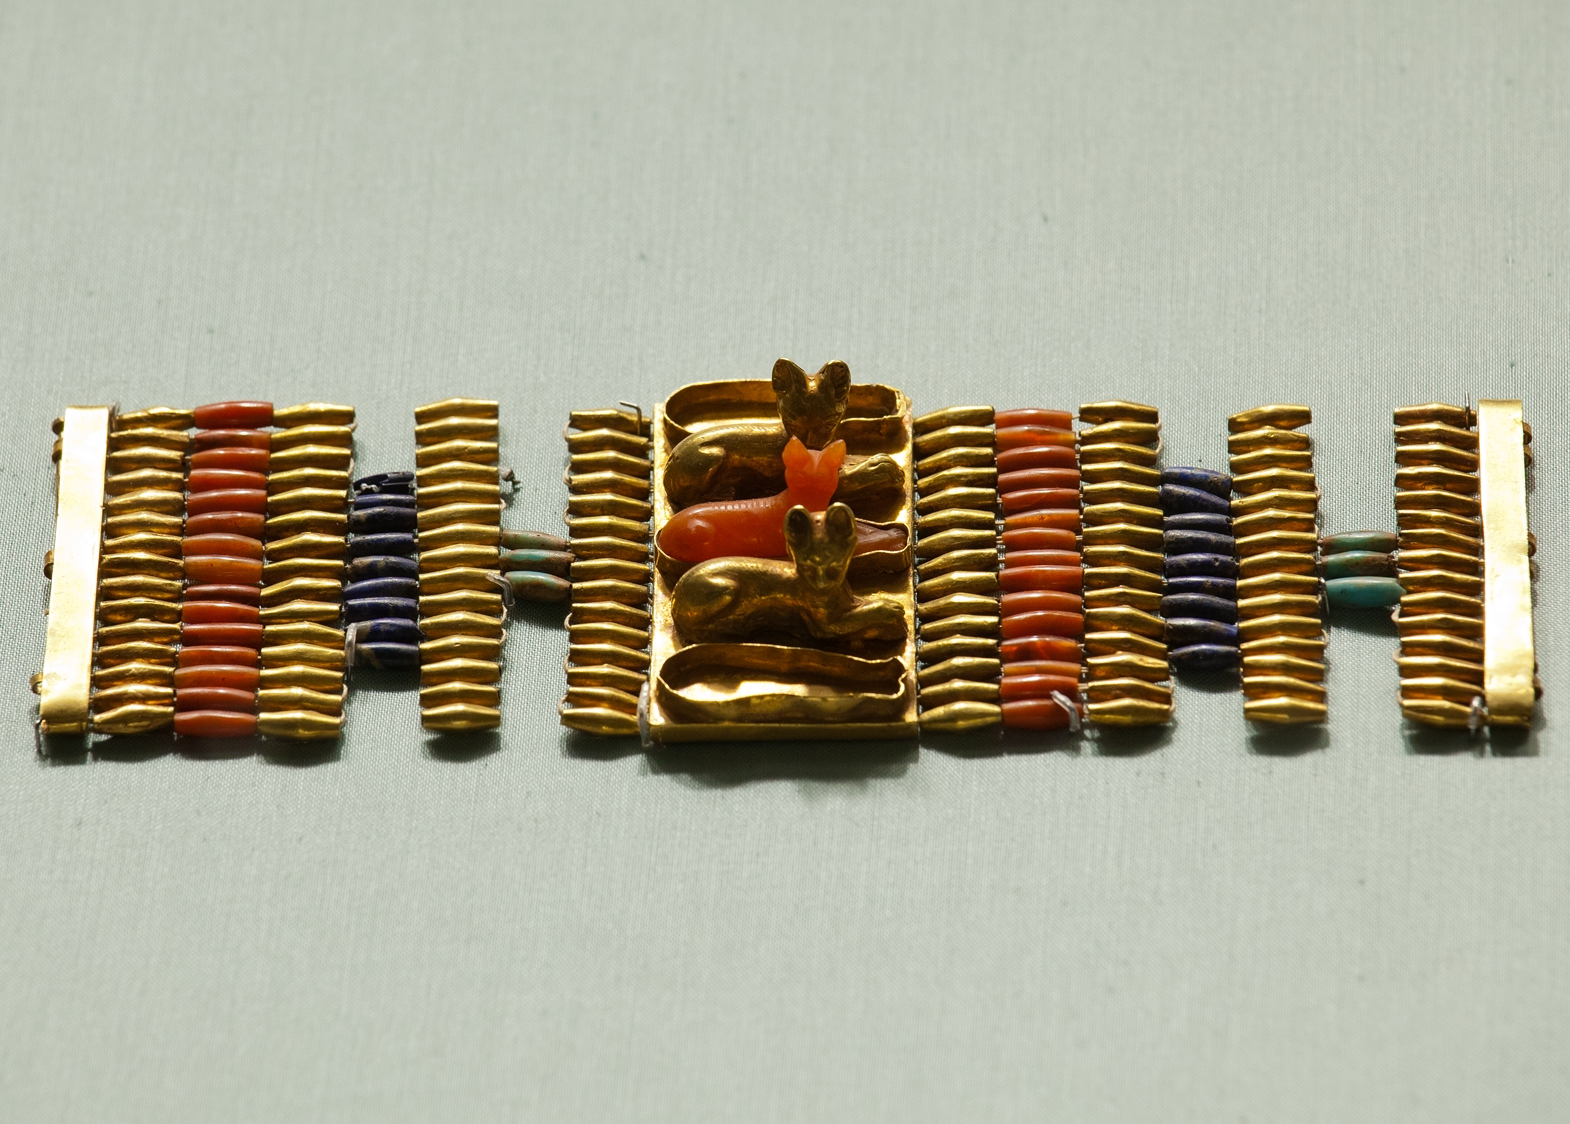 Cuff bracelet decorated with cats. The gold bracelet is accented with carnelian, lapis-lazuli and turquoise glass, 1479-1425 B.C. The Metropolitan Museum of Art. 